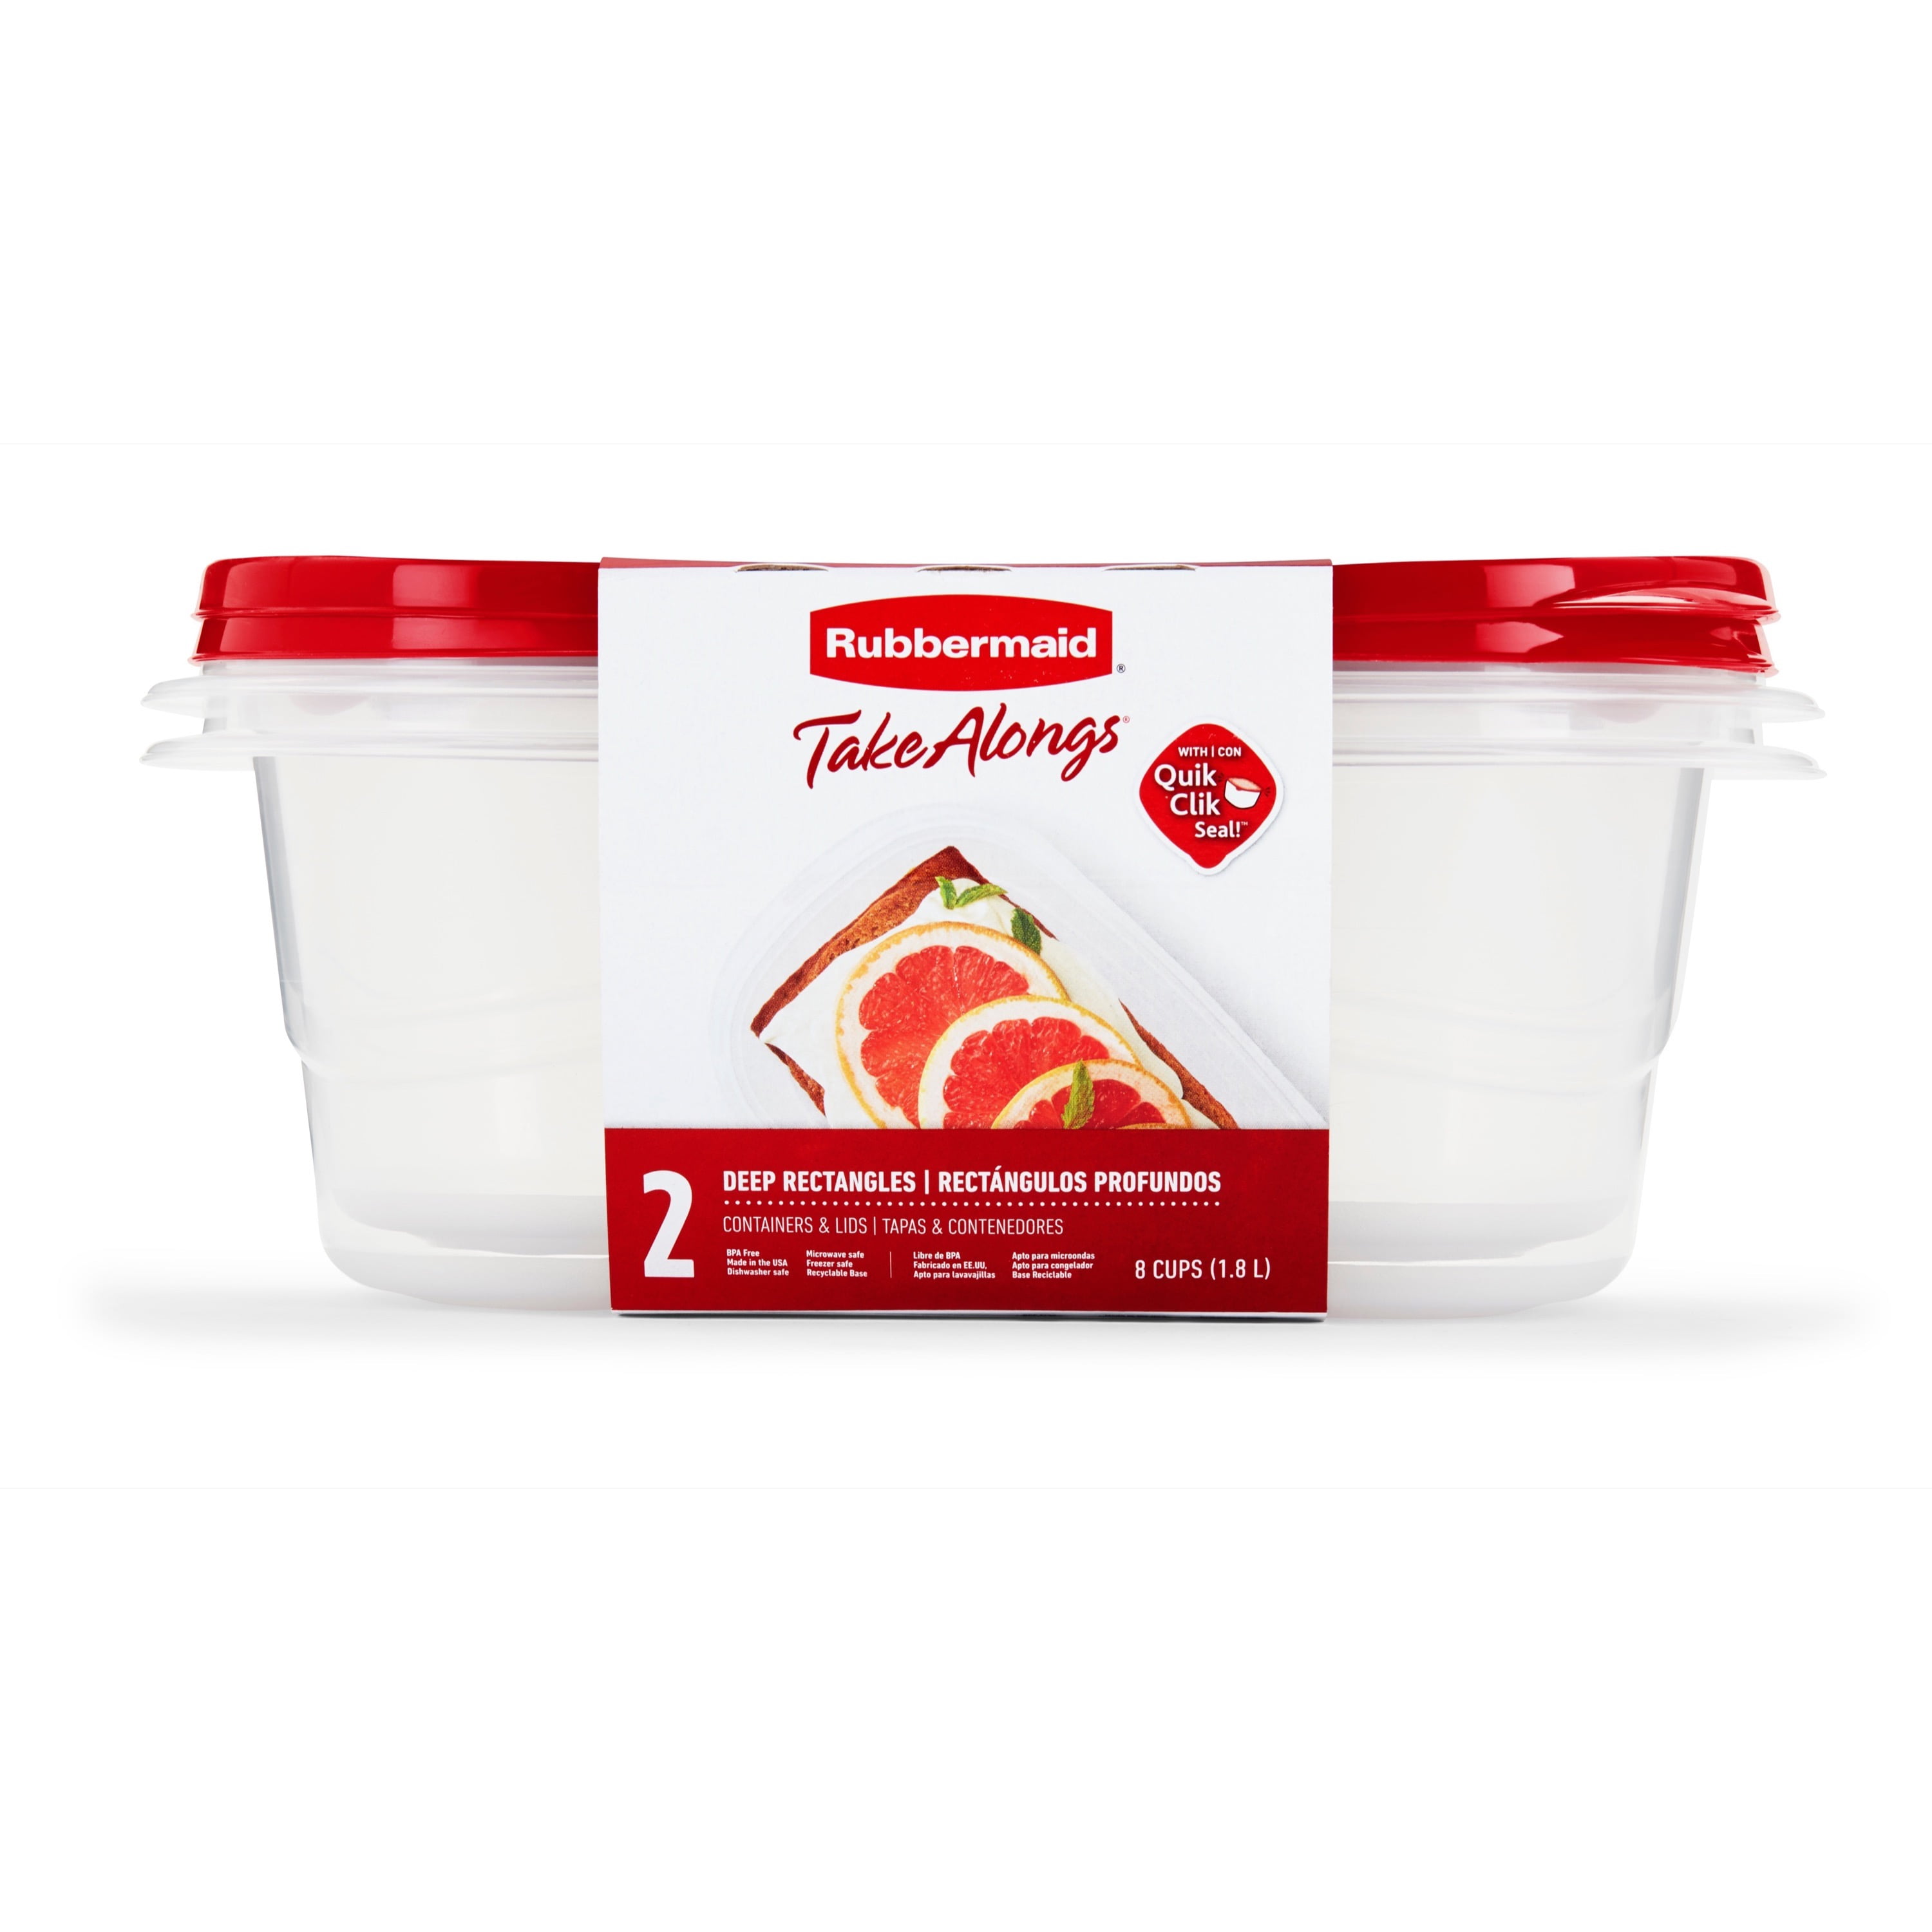 Rubbermaid TakeAlongs Deep Rectangle Food Storage Container (Set of 2), 8 Cups